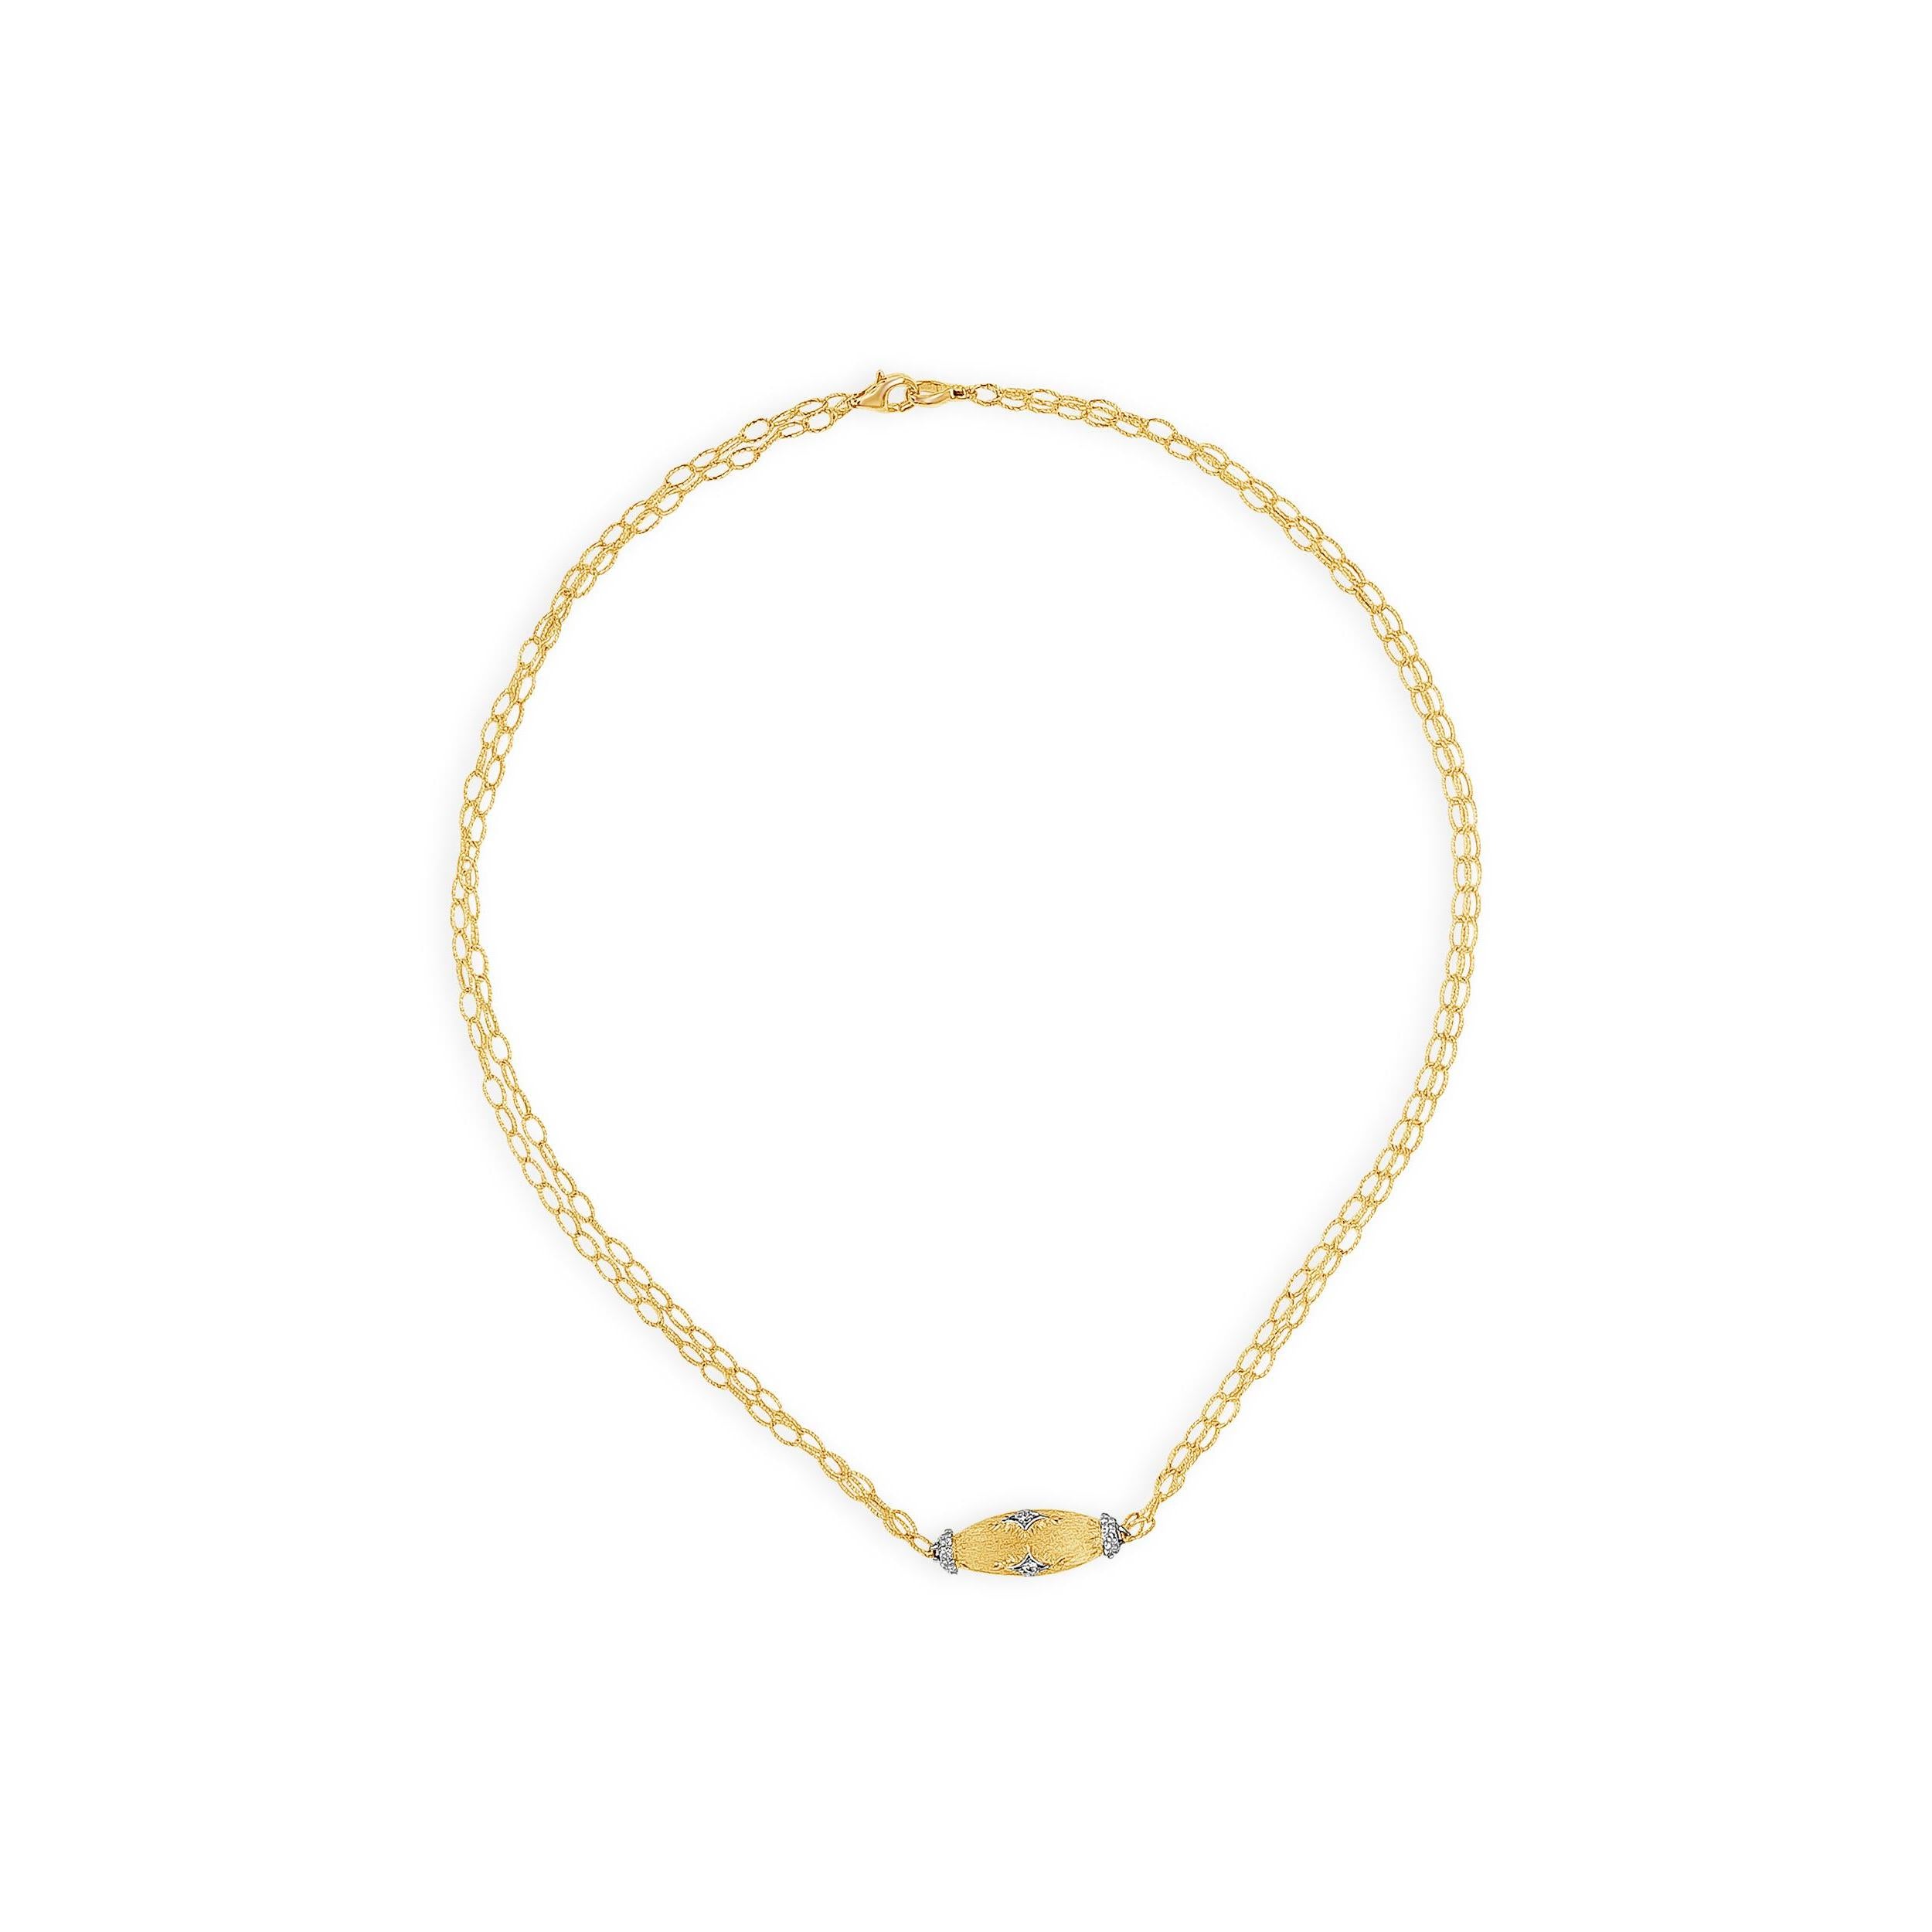 A simple and unique pendant necklace style showcasing an ovoid shaped pendant set with round brilliant diamonds. Pendant has a brushed finish and suspended on a double chain made in yellow gold.  Diamonds weigh 0.10 carats total. Finely made in 18K